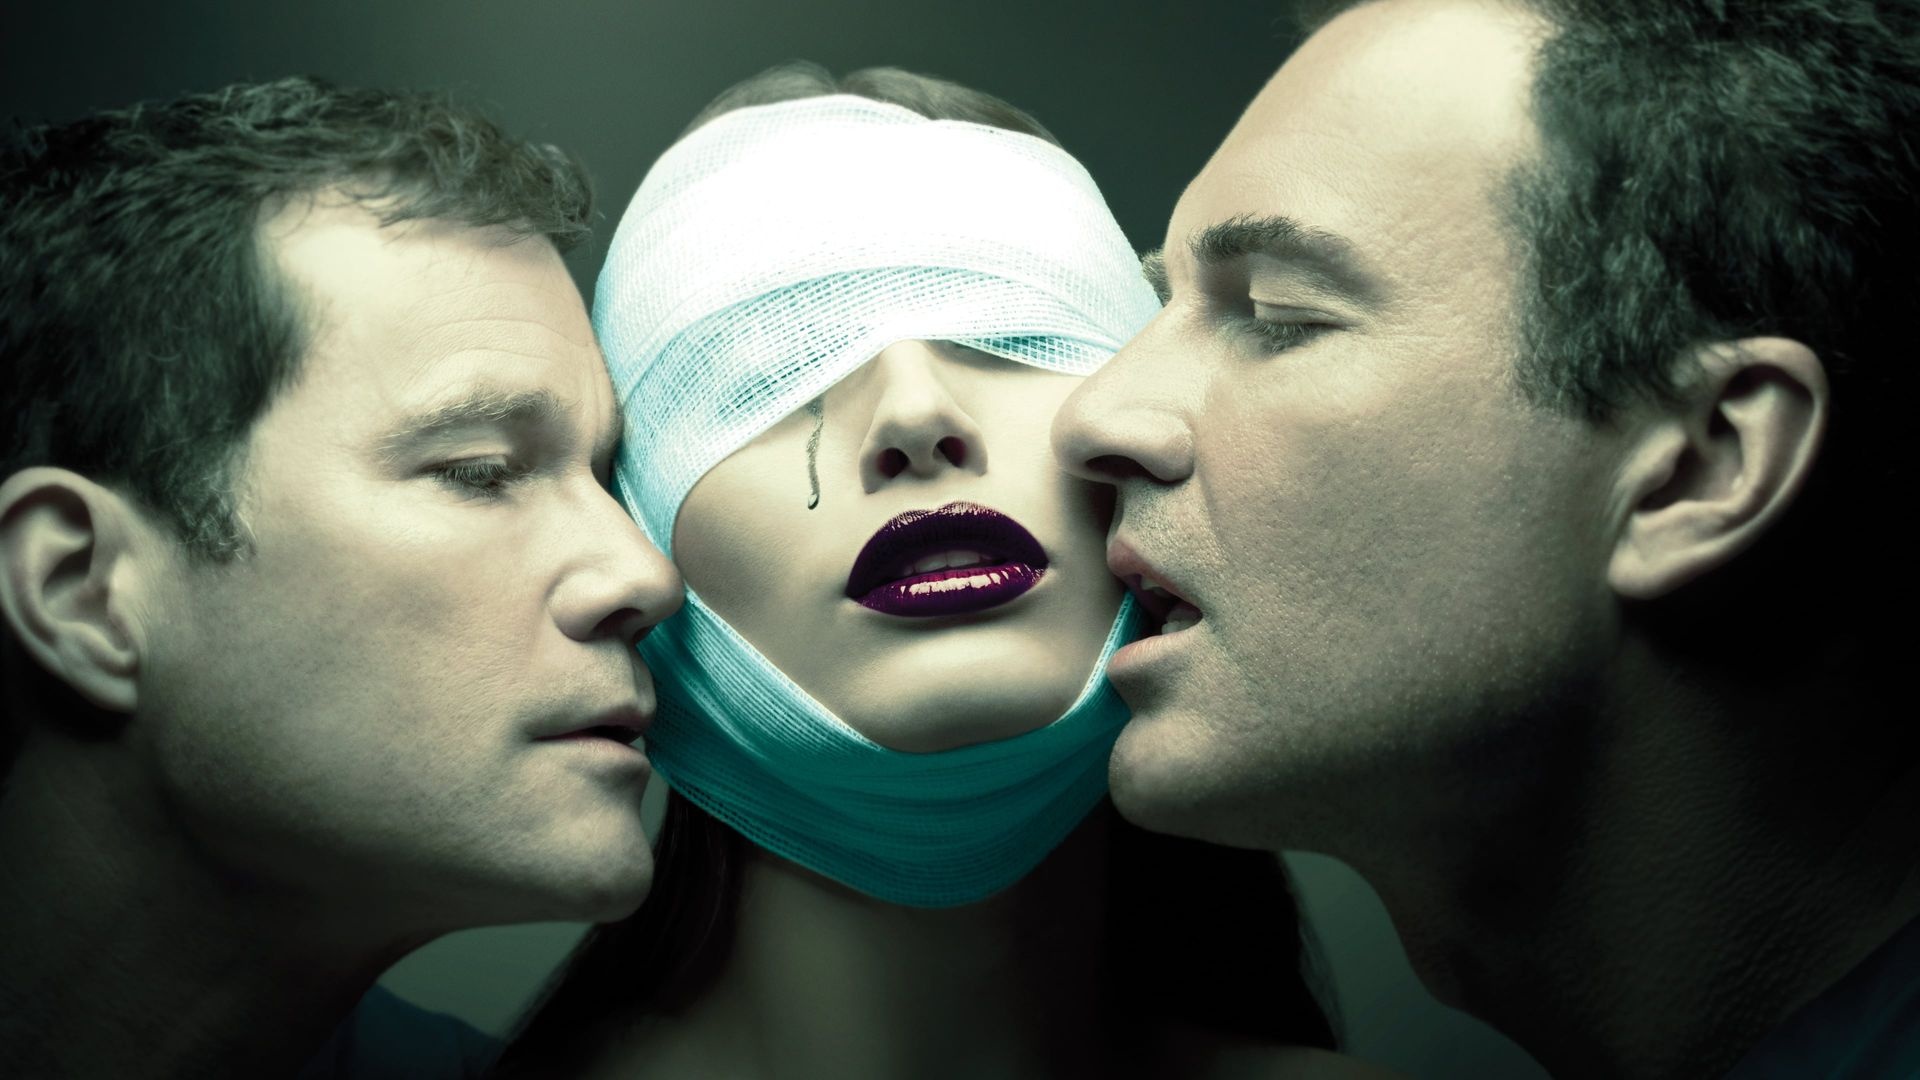 Nip/Tuck (TV Series): The dark and twisted trials of two plastic surgeons. 1920x1080 Full HD Background.